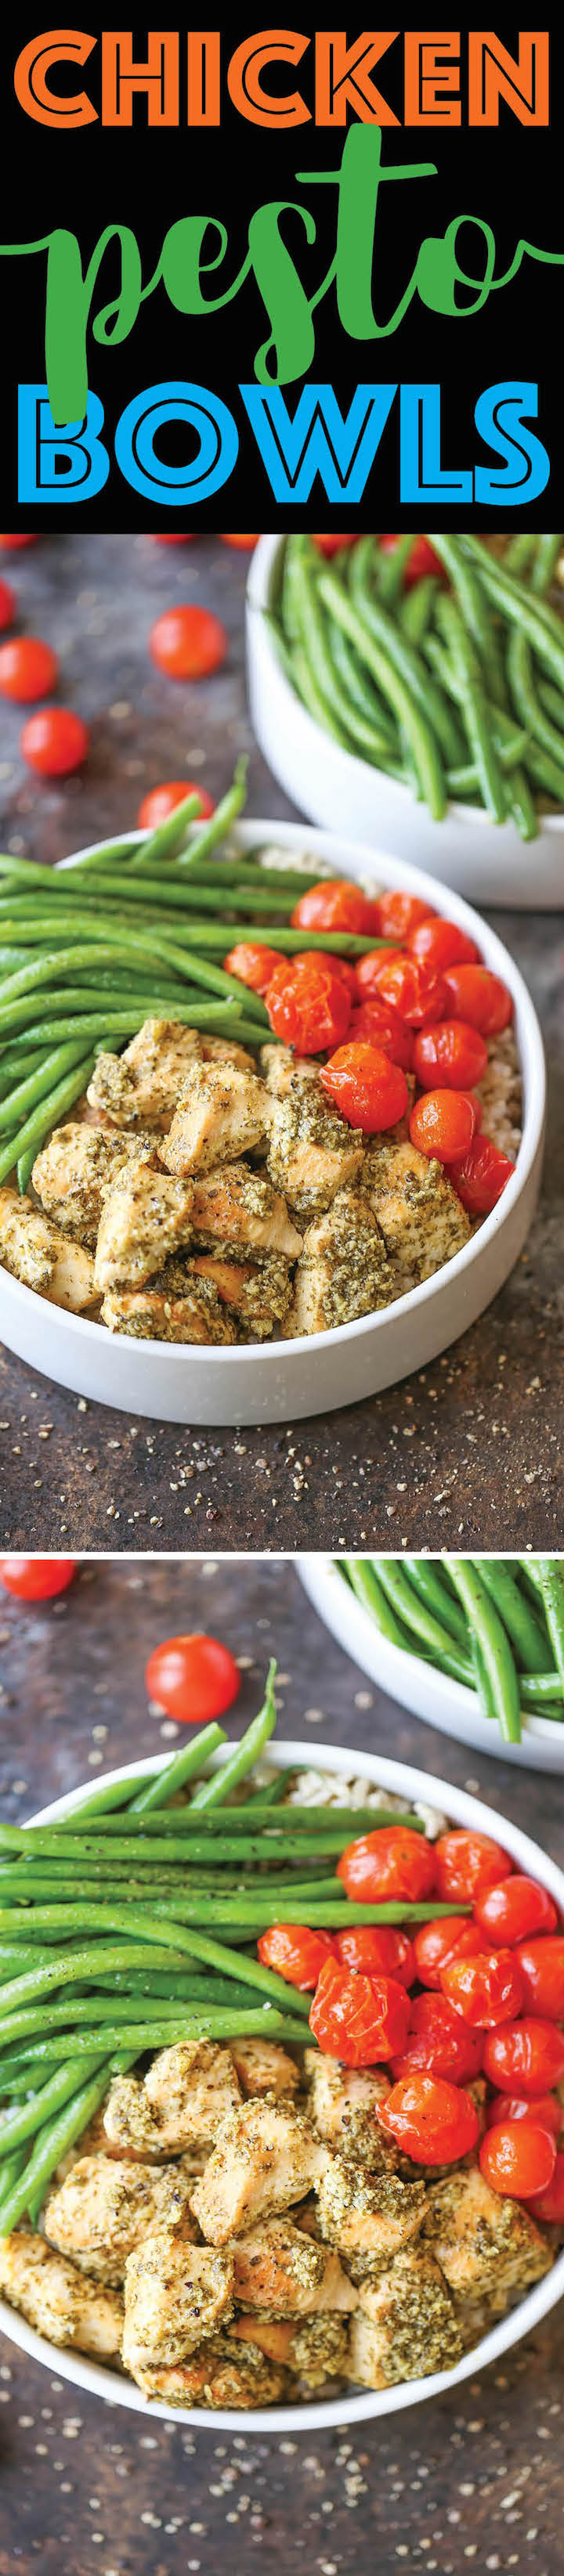 Chicken Pesto Bowls - Healthy pesto chicken bowls served with brown rice, green beans and roasted tomatoes! Easy peasy and can be prepped ahead of time!